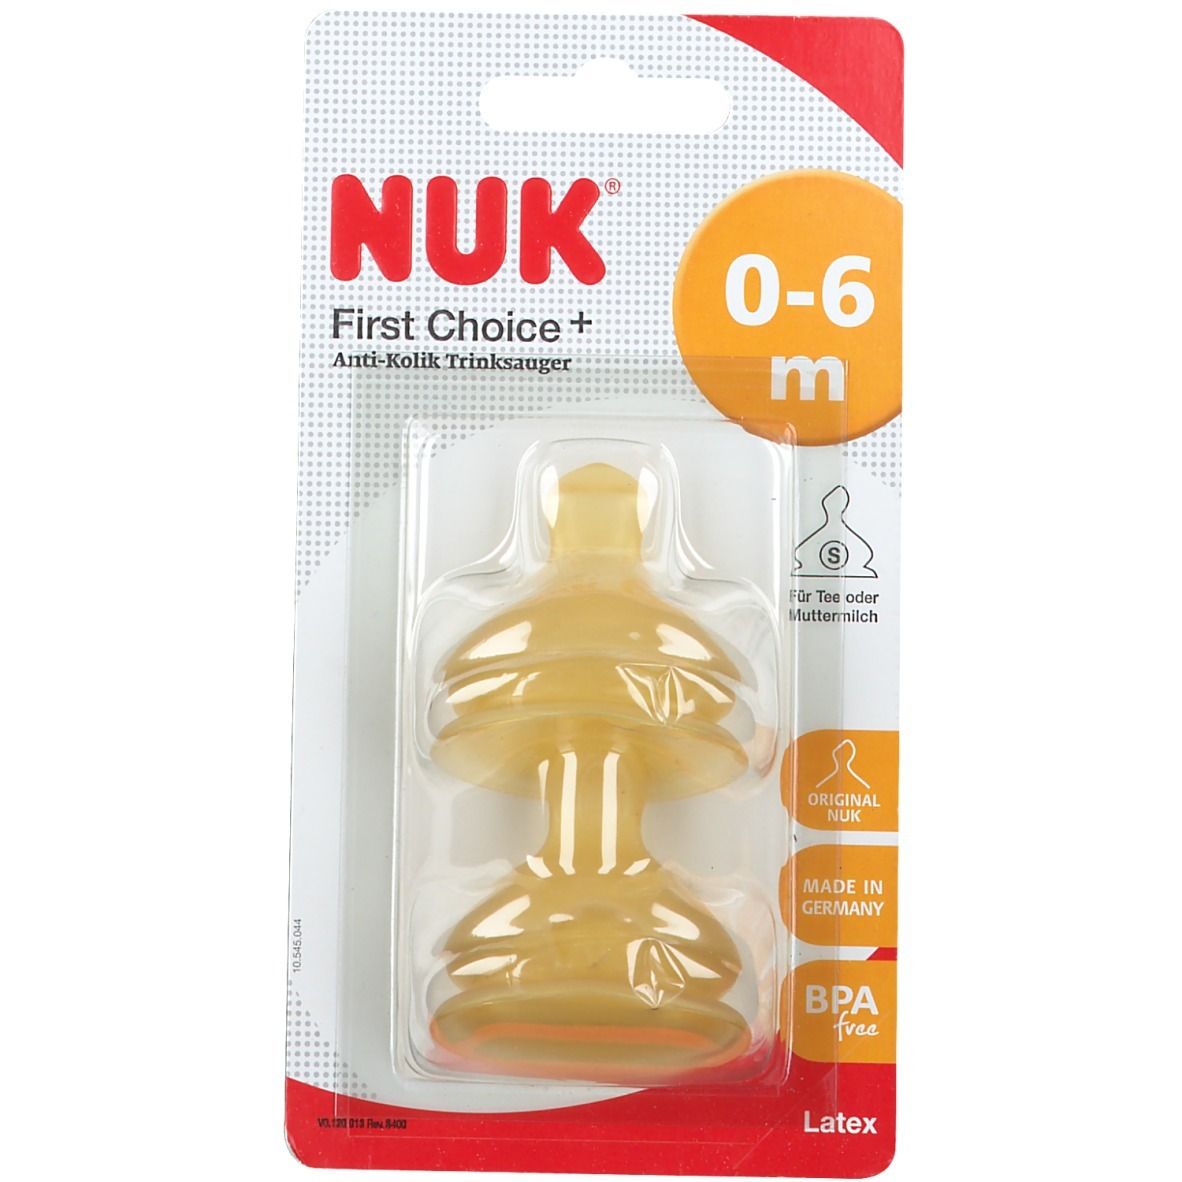 NUK First Choice Plus Latexsauger für Milch & Tee, 0-6 Monate